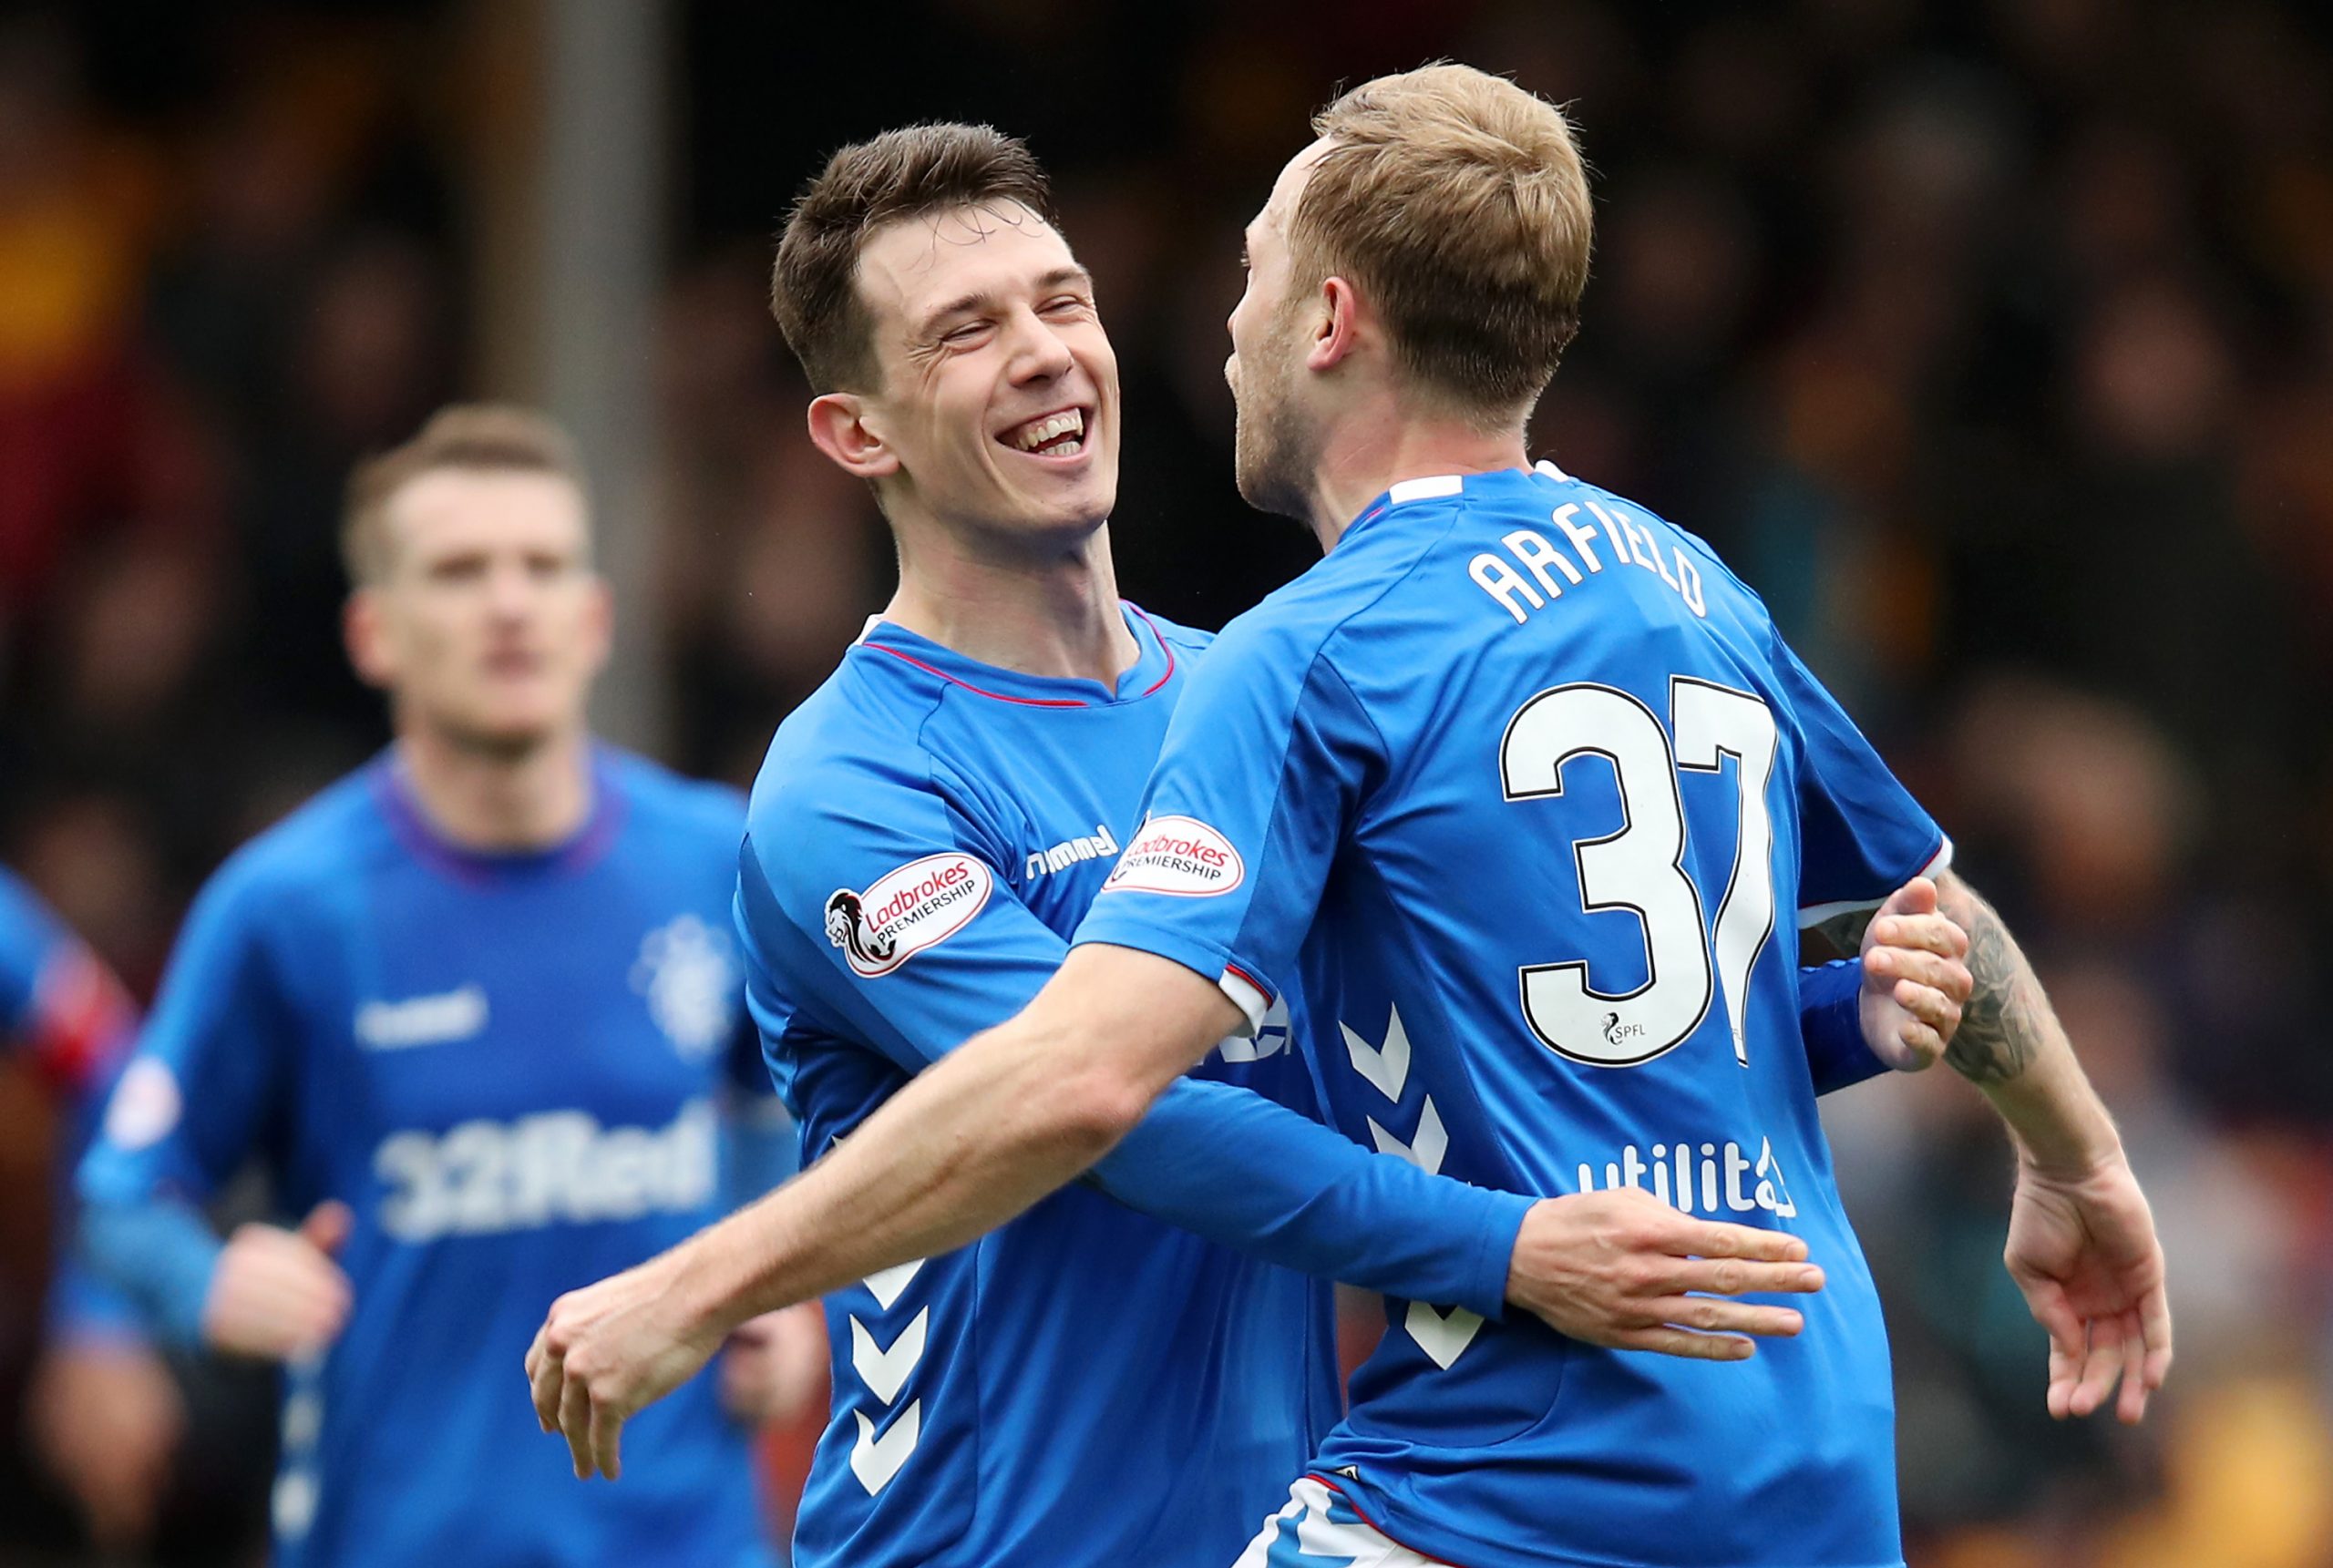 MOTHERWELL, SCOTLAND - APRIL 07: Scott Arfield of Rangers (R) celebrates after scoring his team's second goal with Ryan Jack of Rangers during the Scottish Ladbrokes Premiership match between Motherwell and Rangers at Fir Park on April 07, 2019 in Motherwell, Scotland.